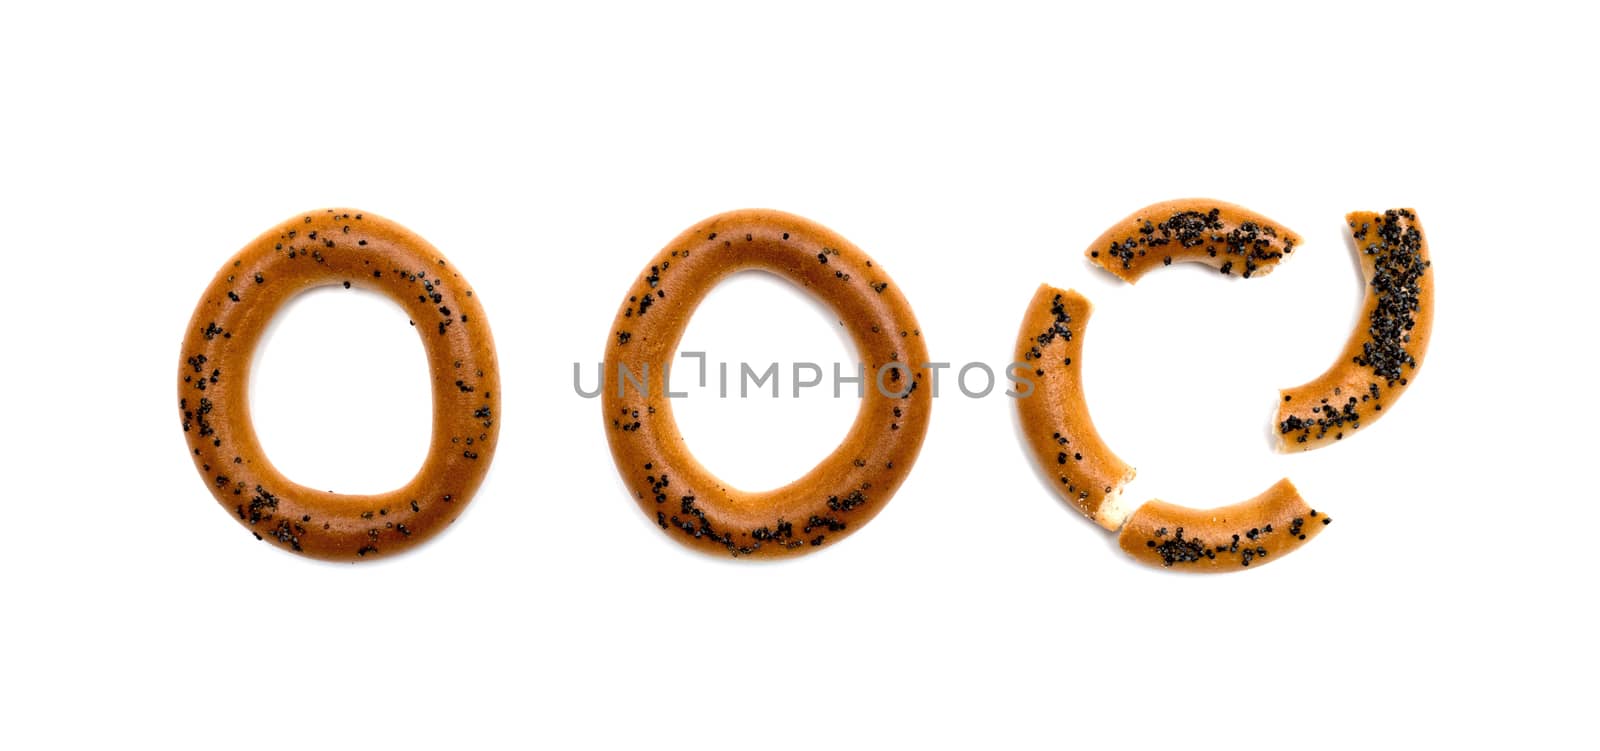 bagels with poppy seeds on a white background by DNKSTUDIO